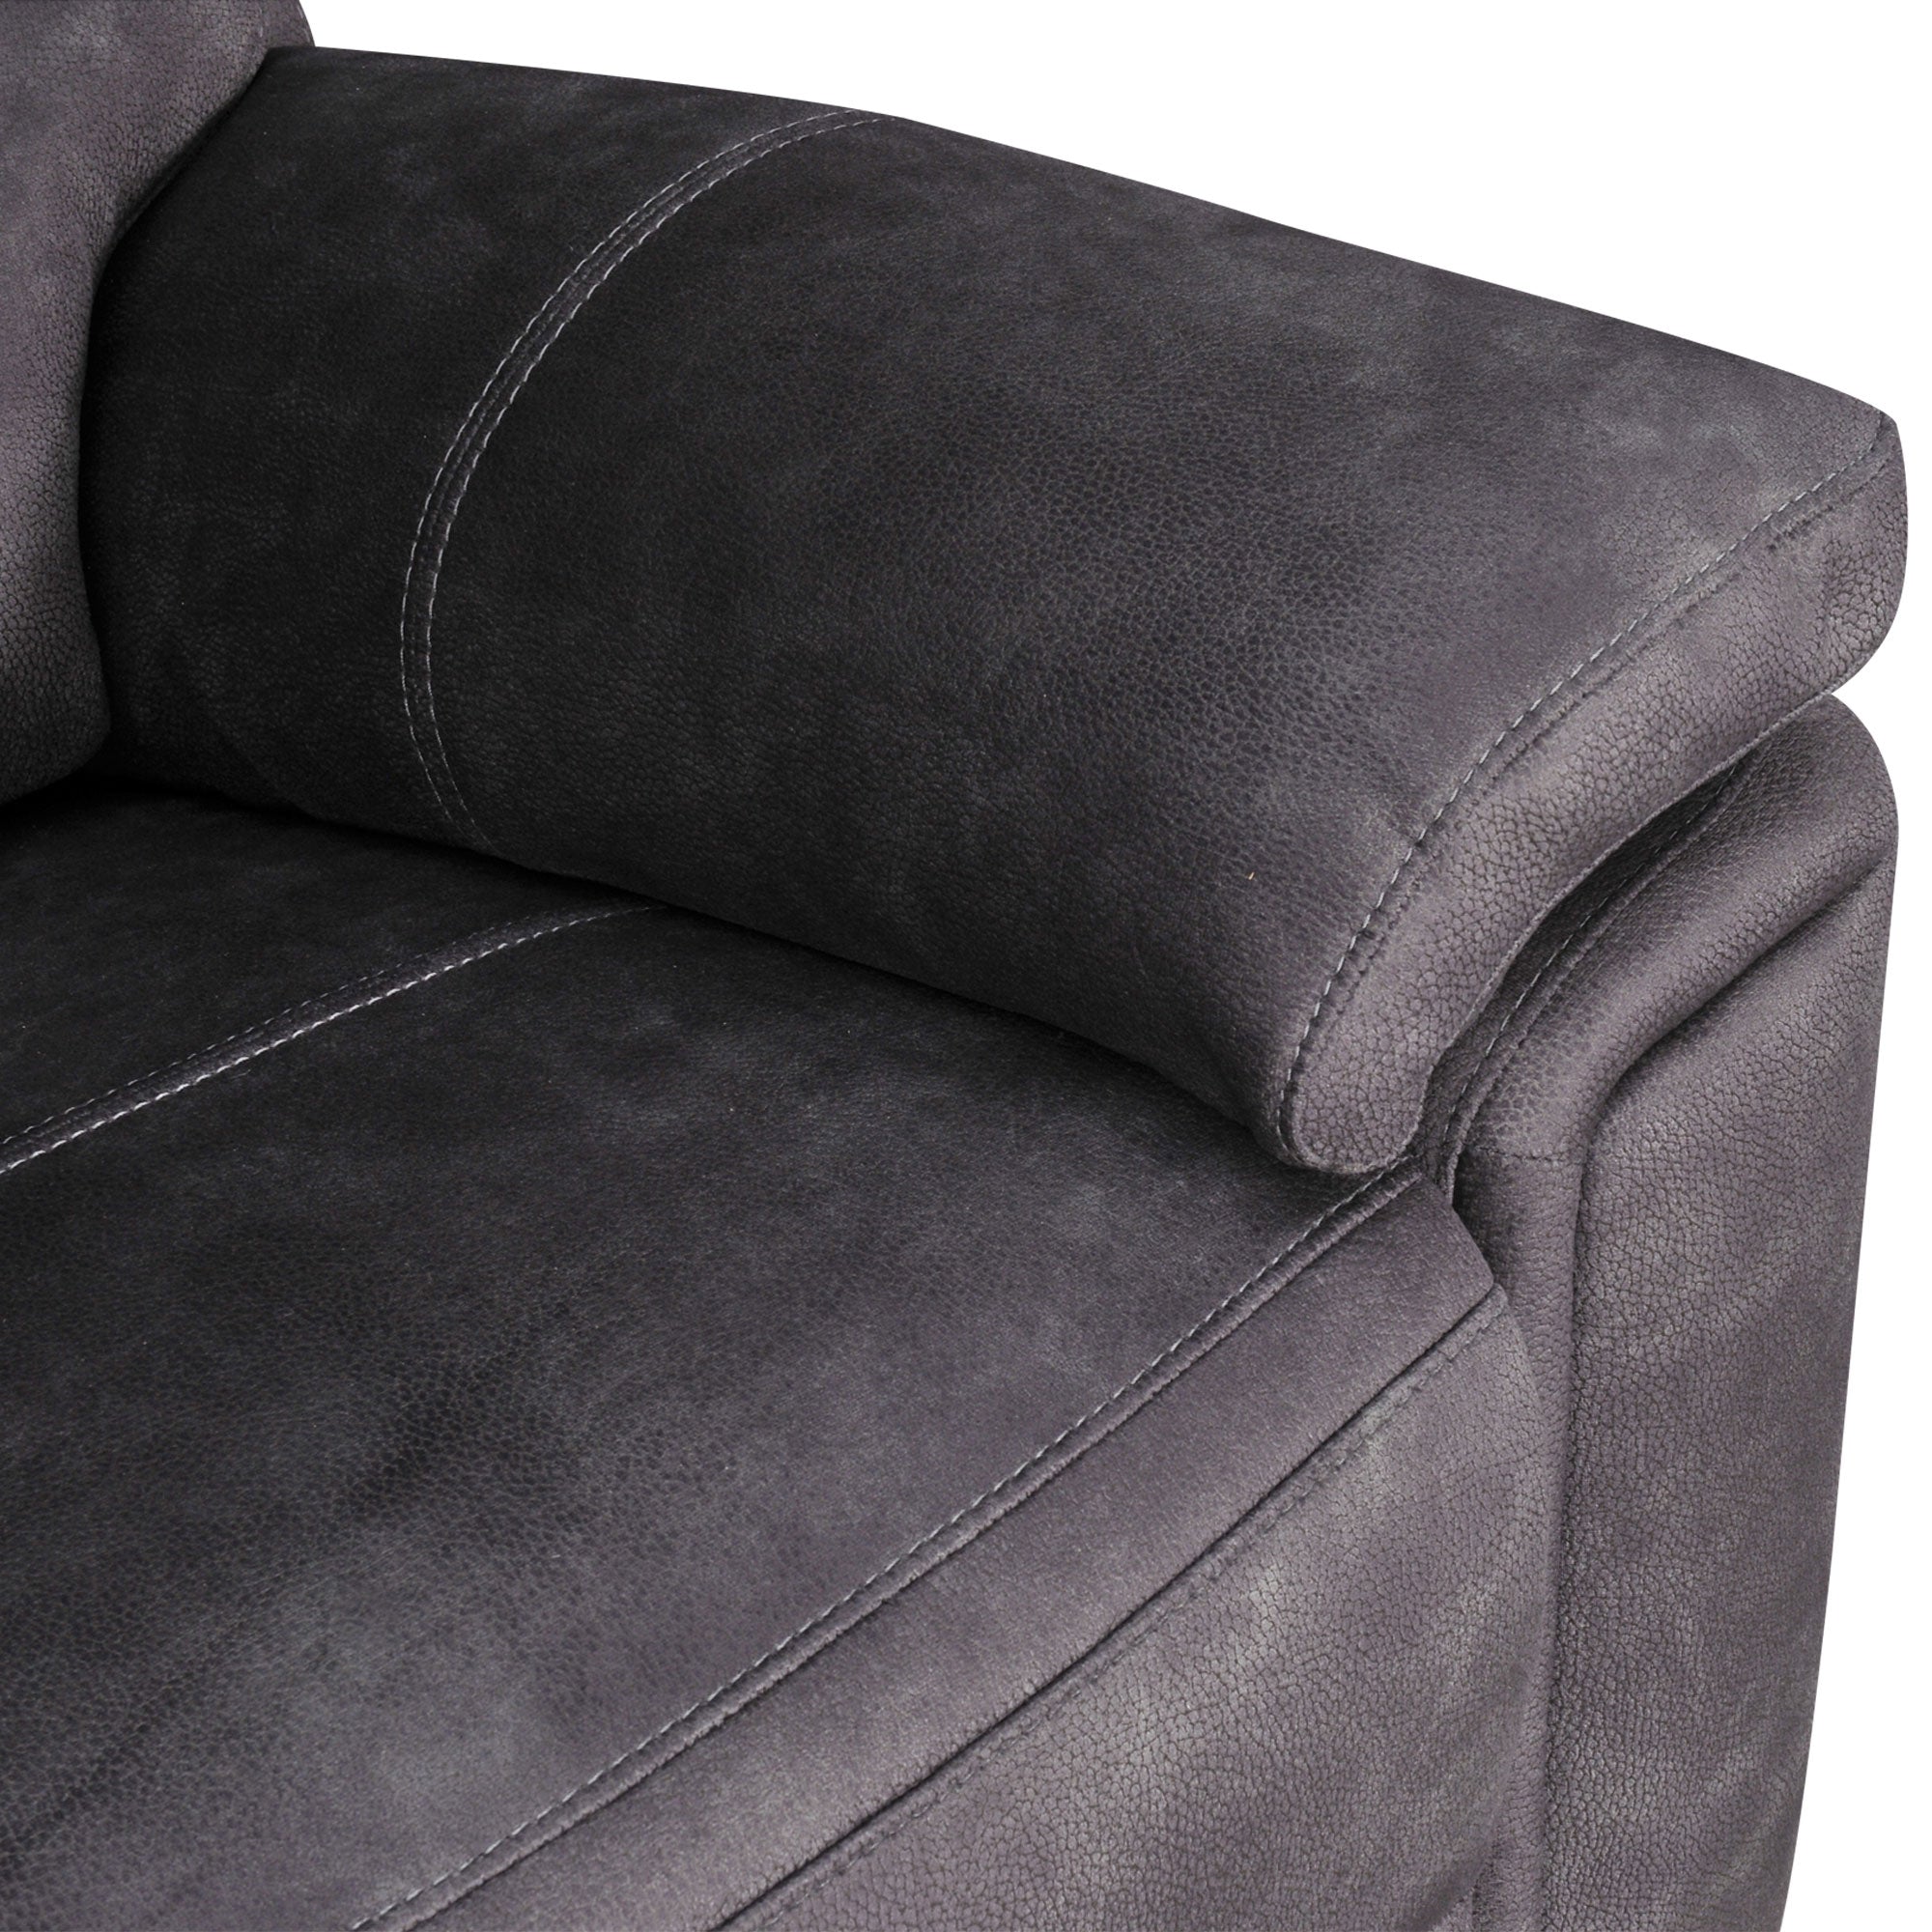 Tampa - Manual Recliner Chair In Fabric Or Leather Fabric Grade BSF20